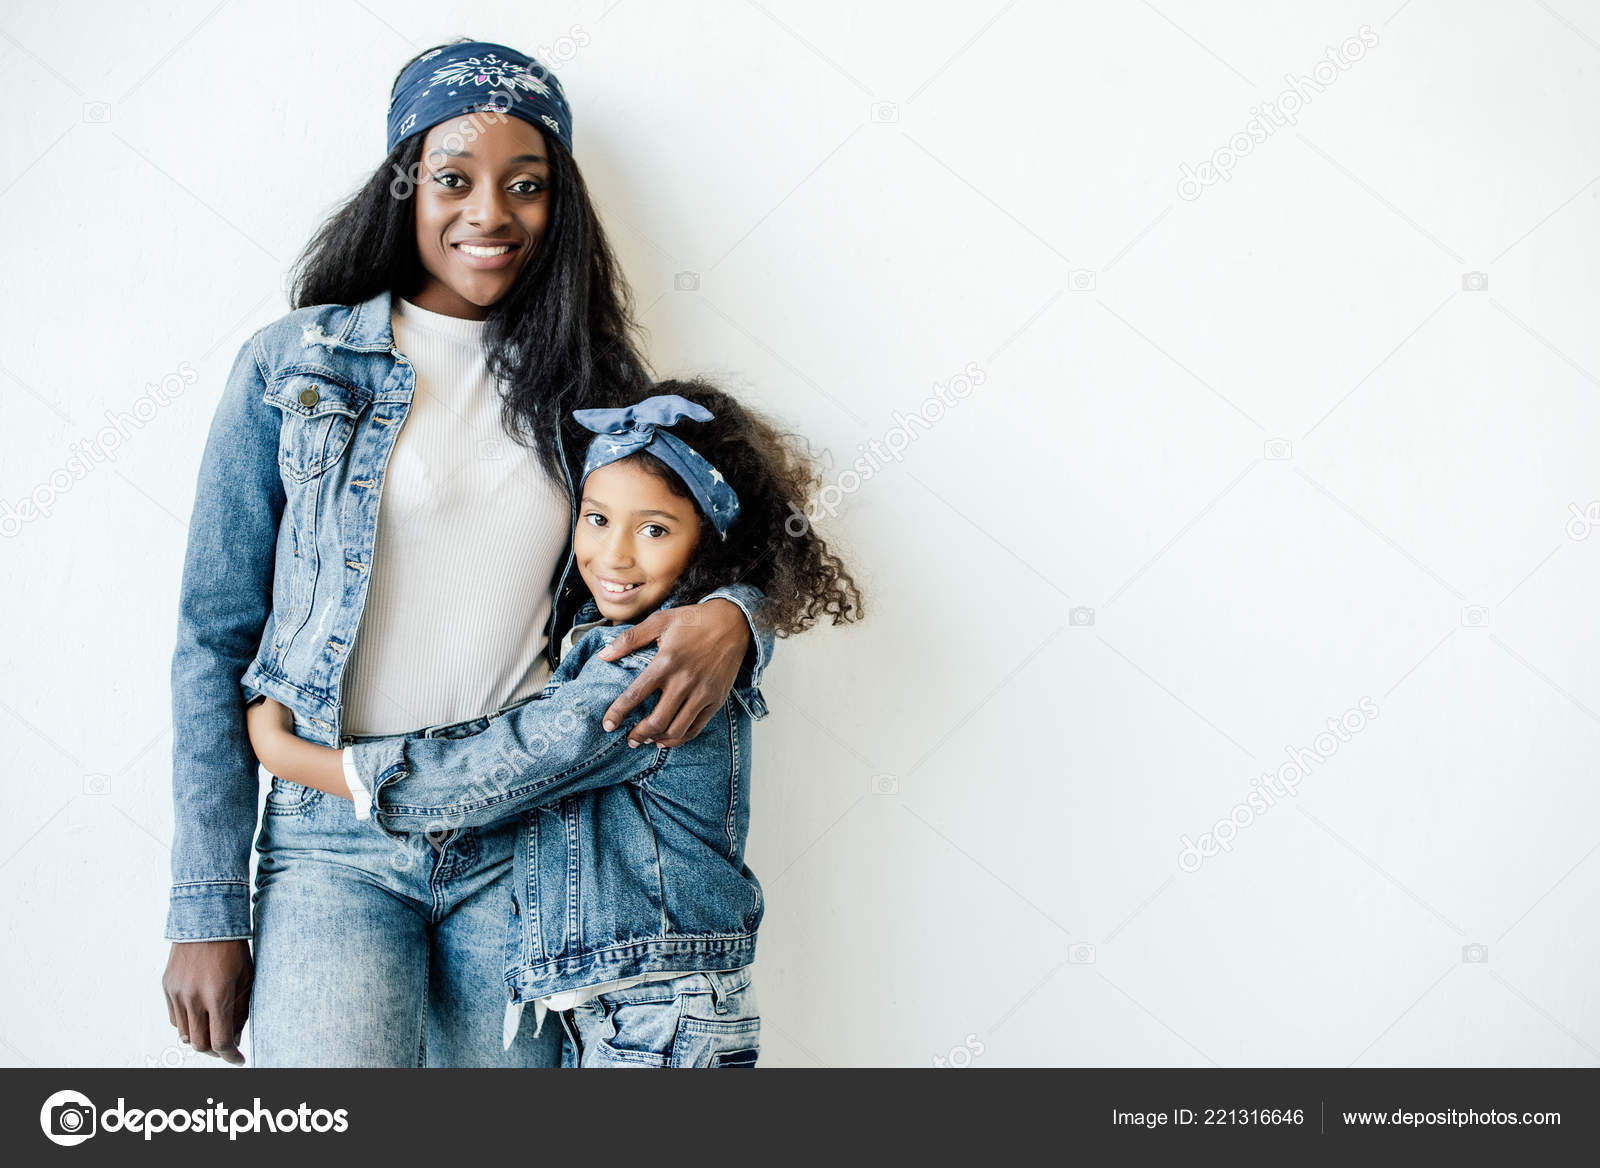 Mother Daughter Poses and Fashion Inspiration